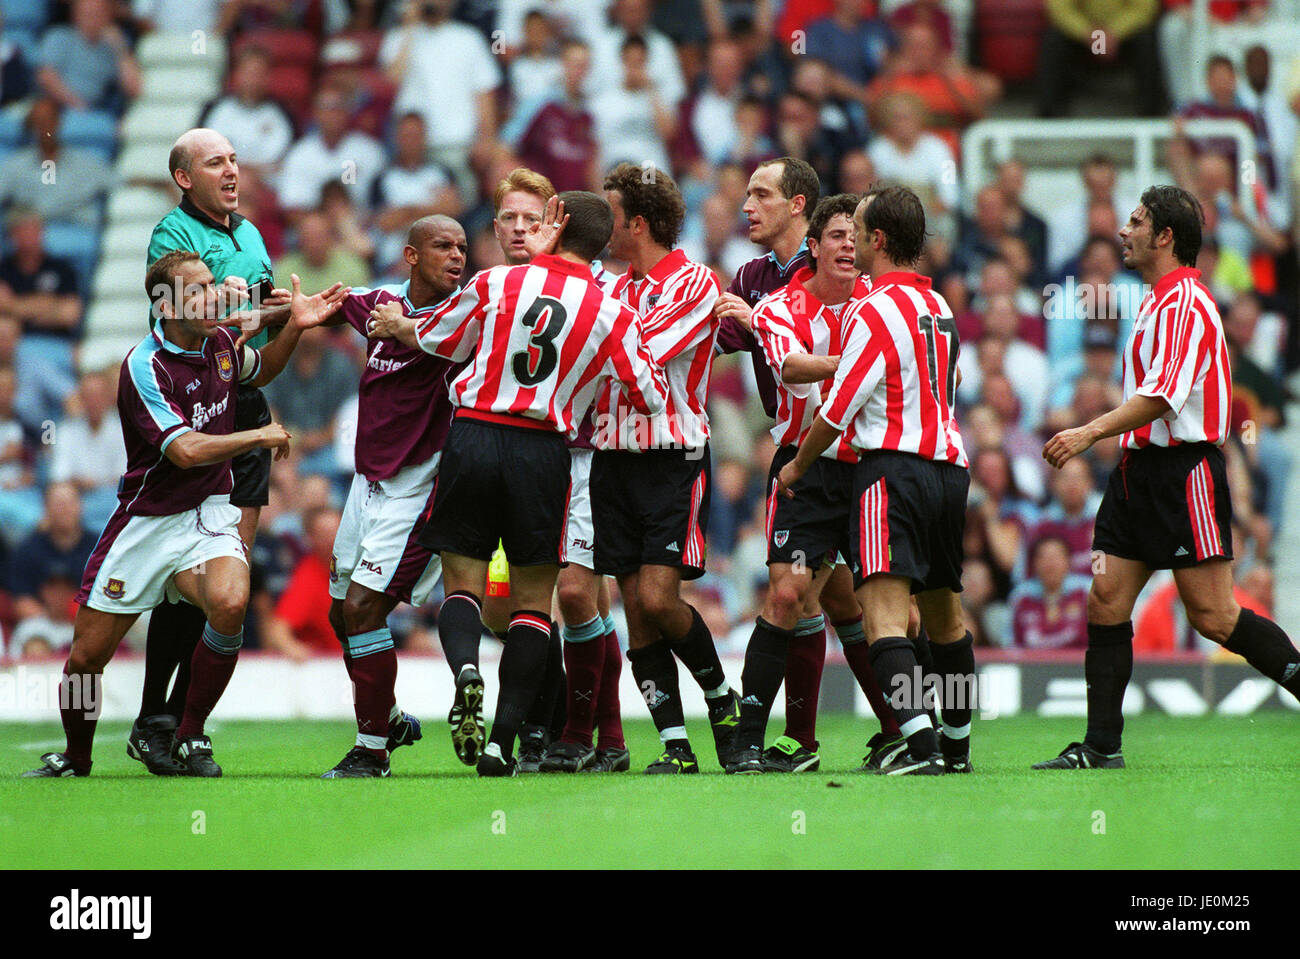 PAOLO DI CANIO FIGHTS BILBAO WEST HAM UNITED FC UPTON PARK LONDON ENGLAND  13 August 2000 Stock Photo - Alamy